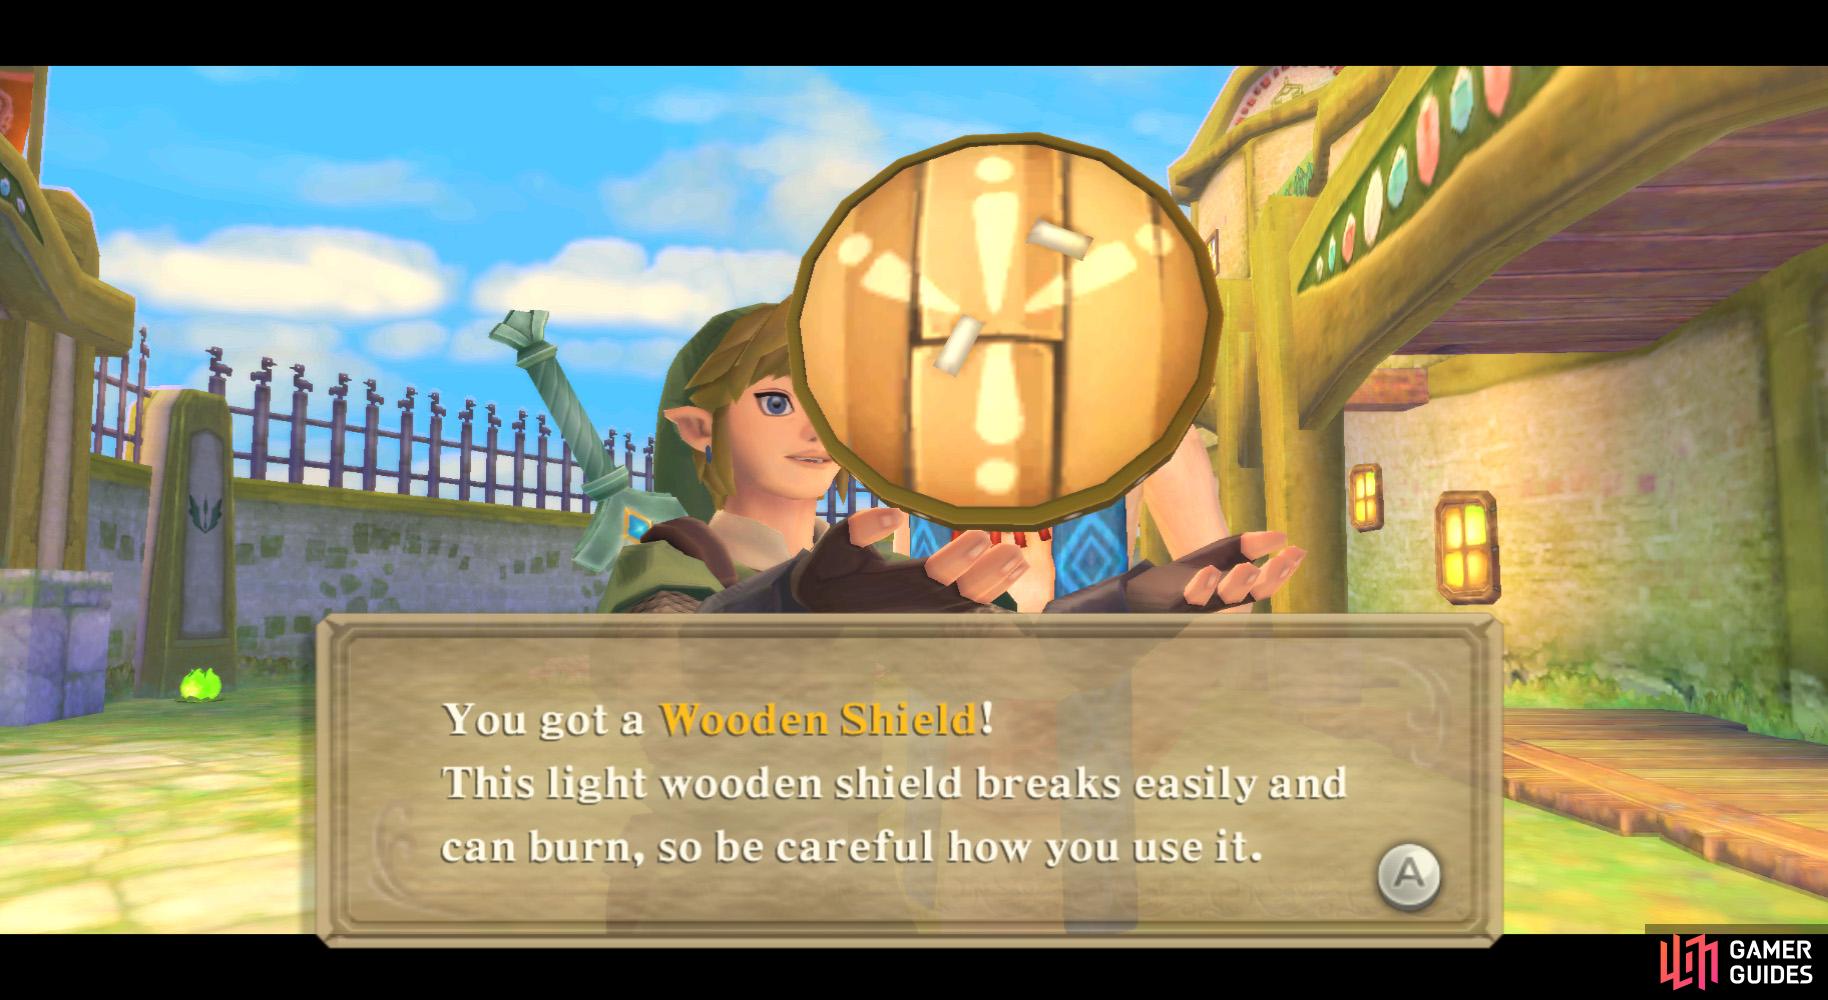 The Wooden Shield offers decent protection early on in the game.